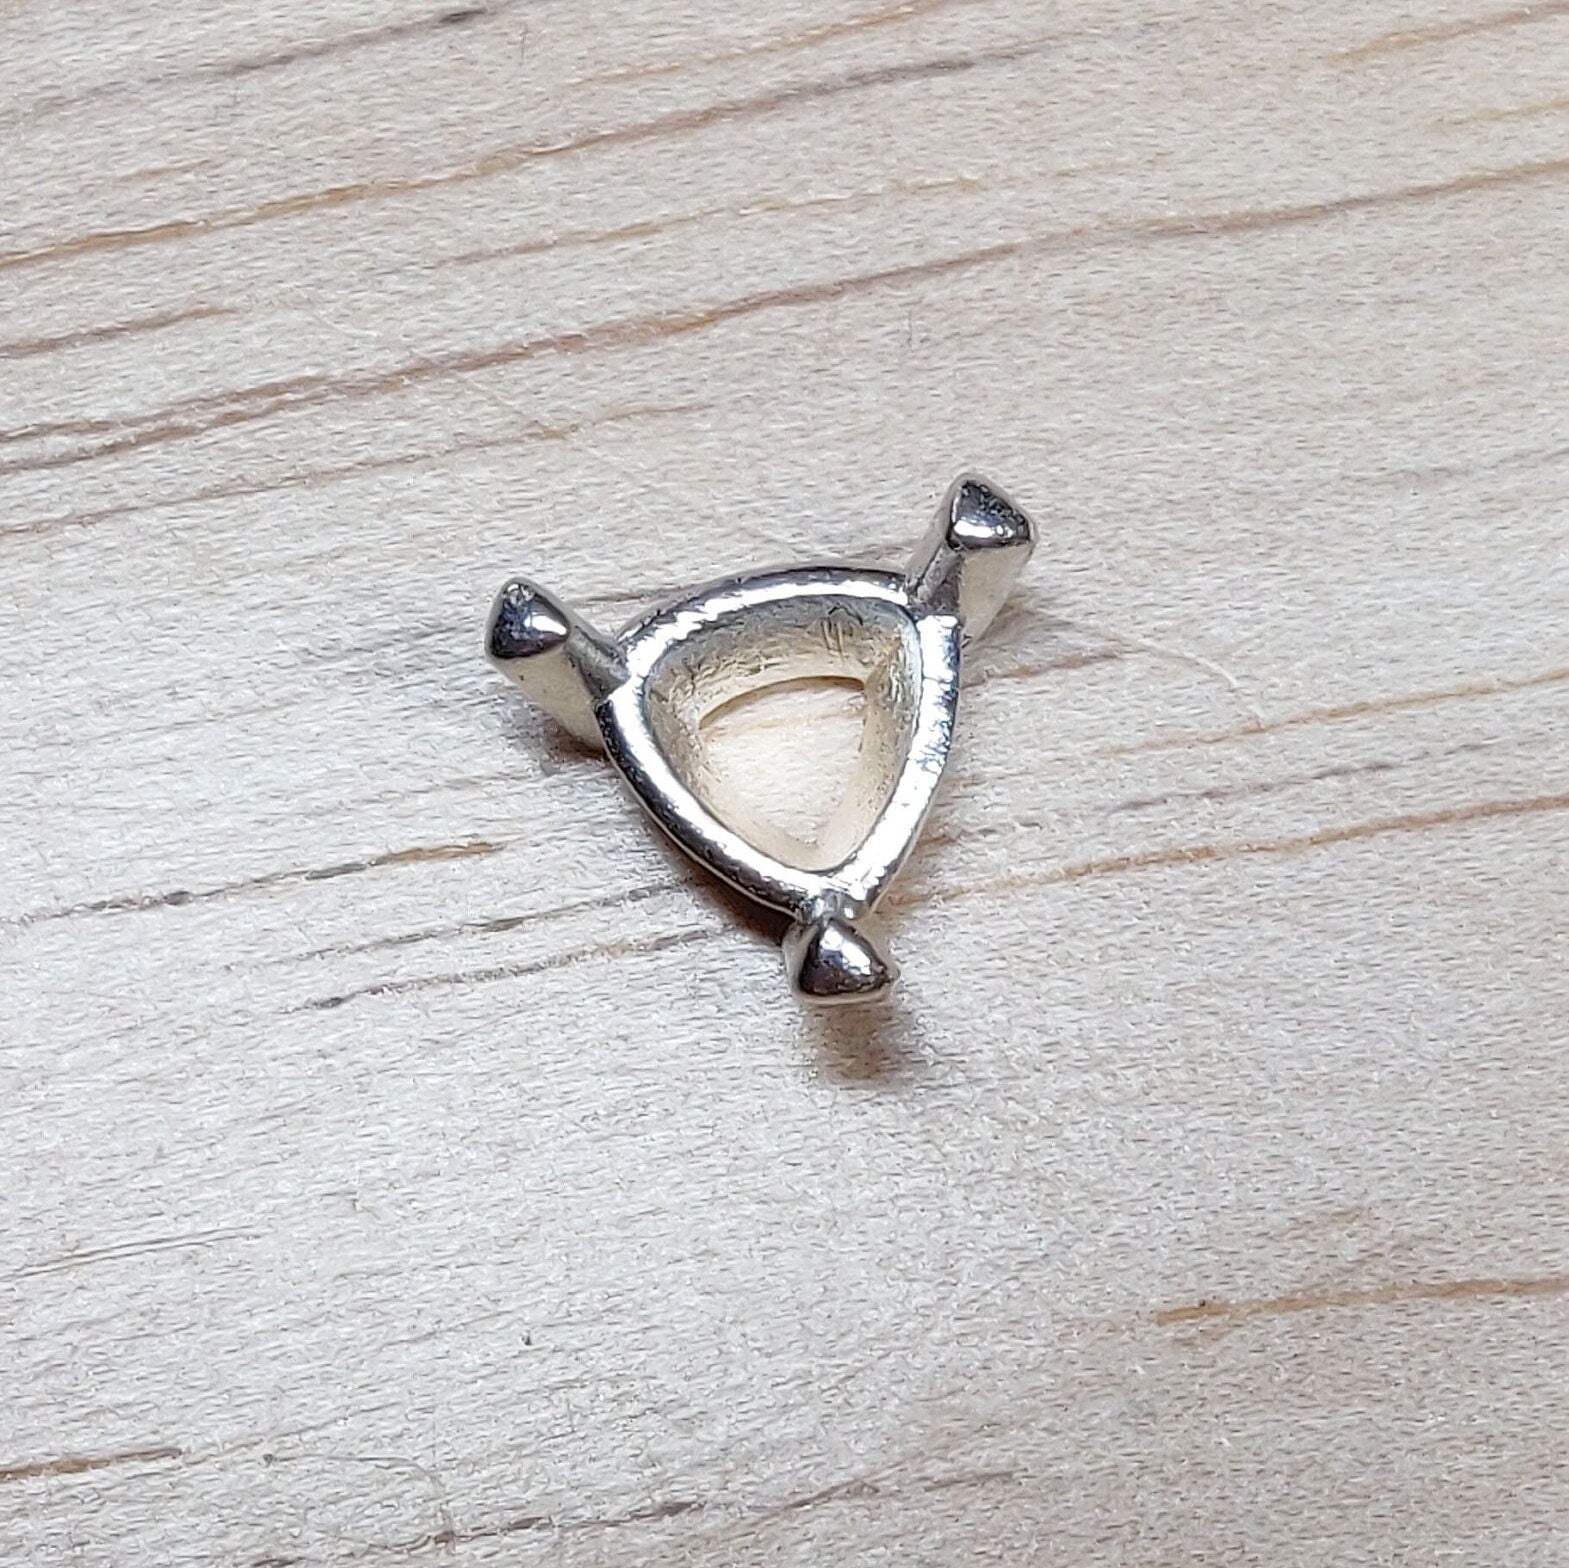 Top view of a silver trillion prong setting on a wooden background.